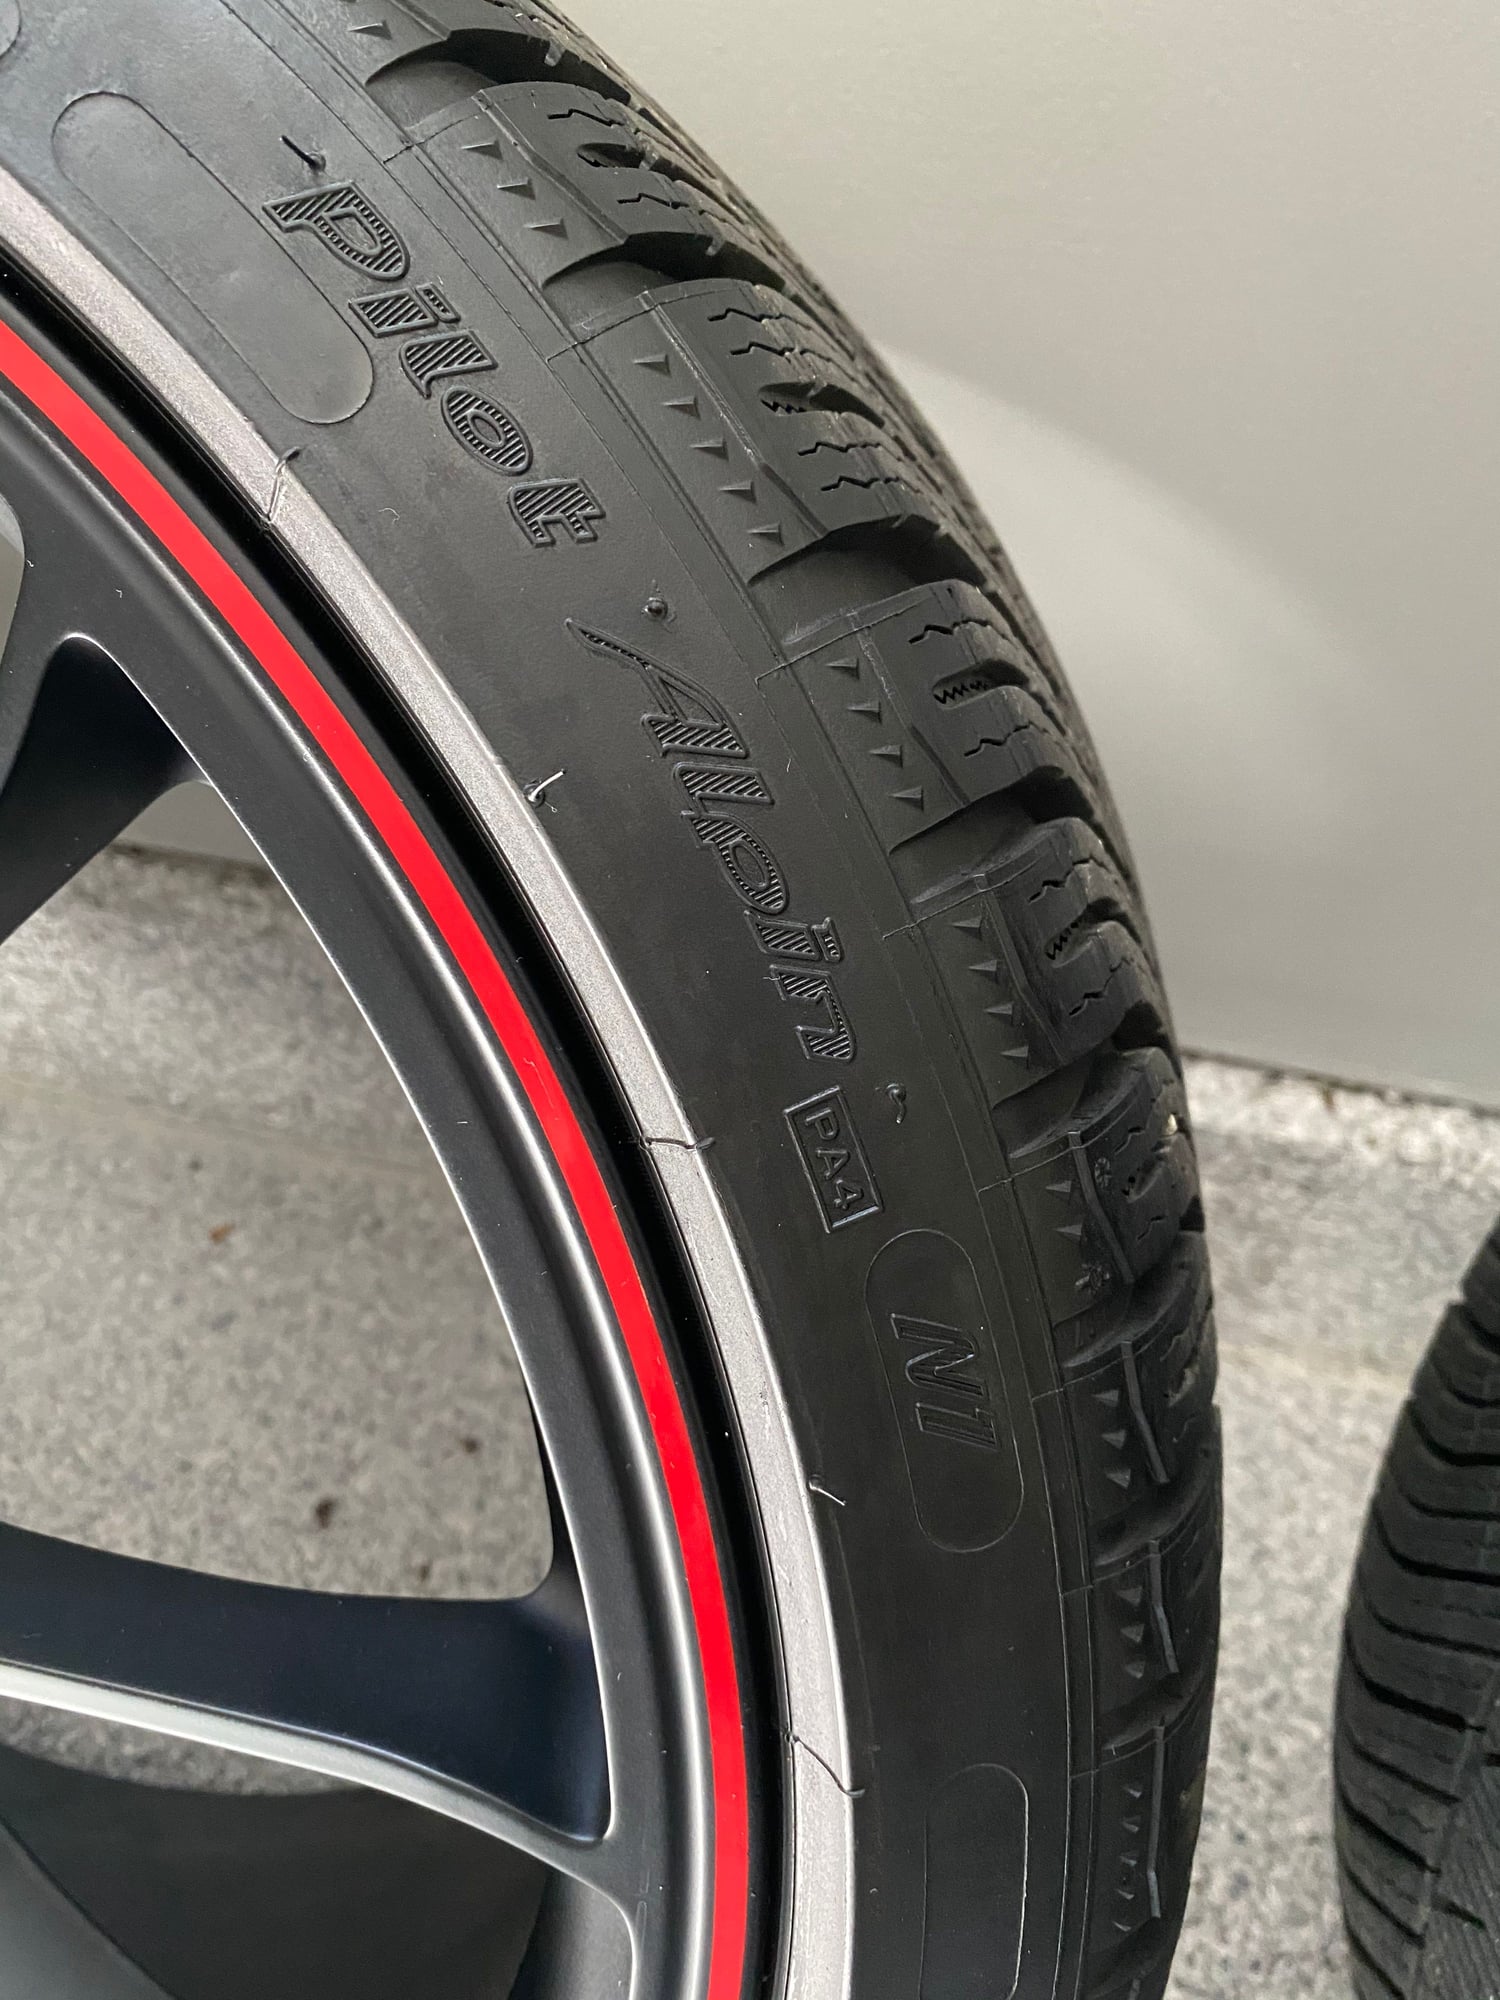 Wheels and Tires/Axles - Selling 991.2 GT3 OEM Black Red Pinstripe wheels with Michelin Alpin Winter Tires - Used - 2013 to 2020 Porsche GT3 - Barrington, IL 60010, United States